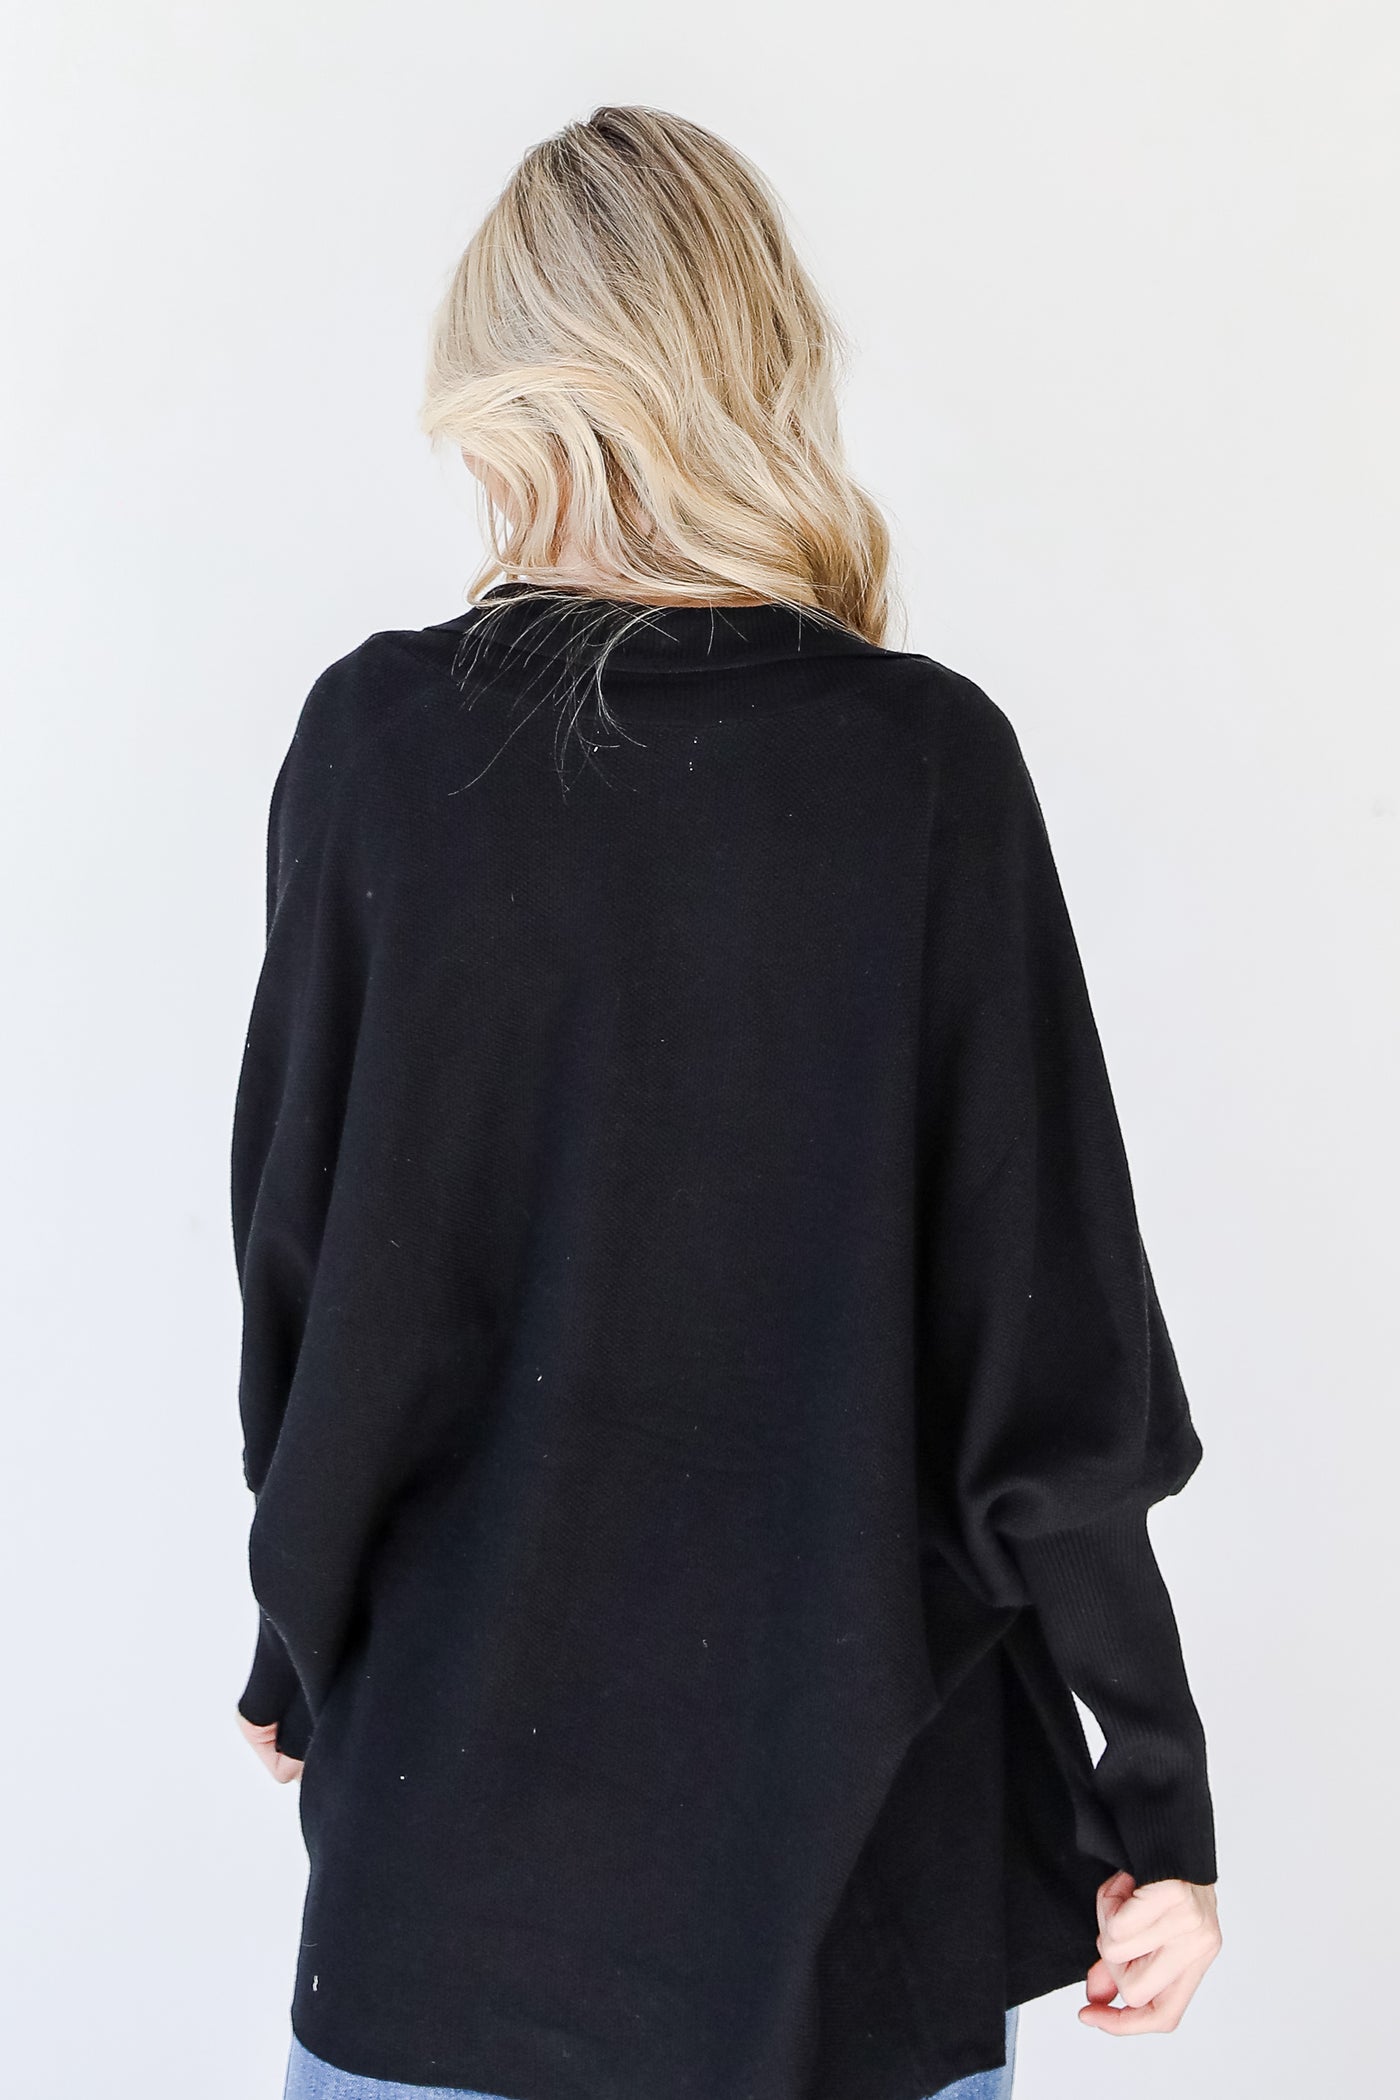 Cardigan in black back view